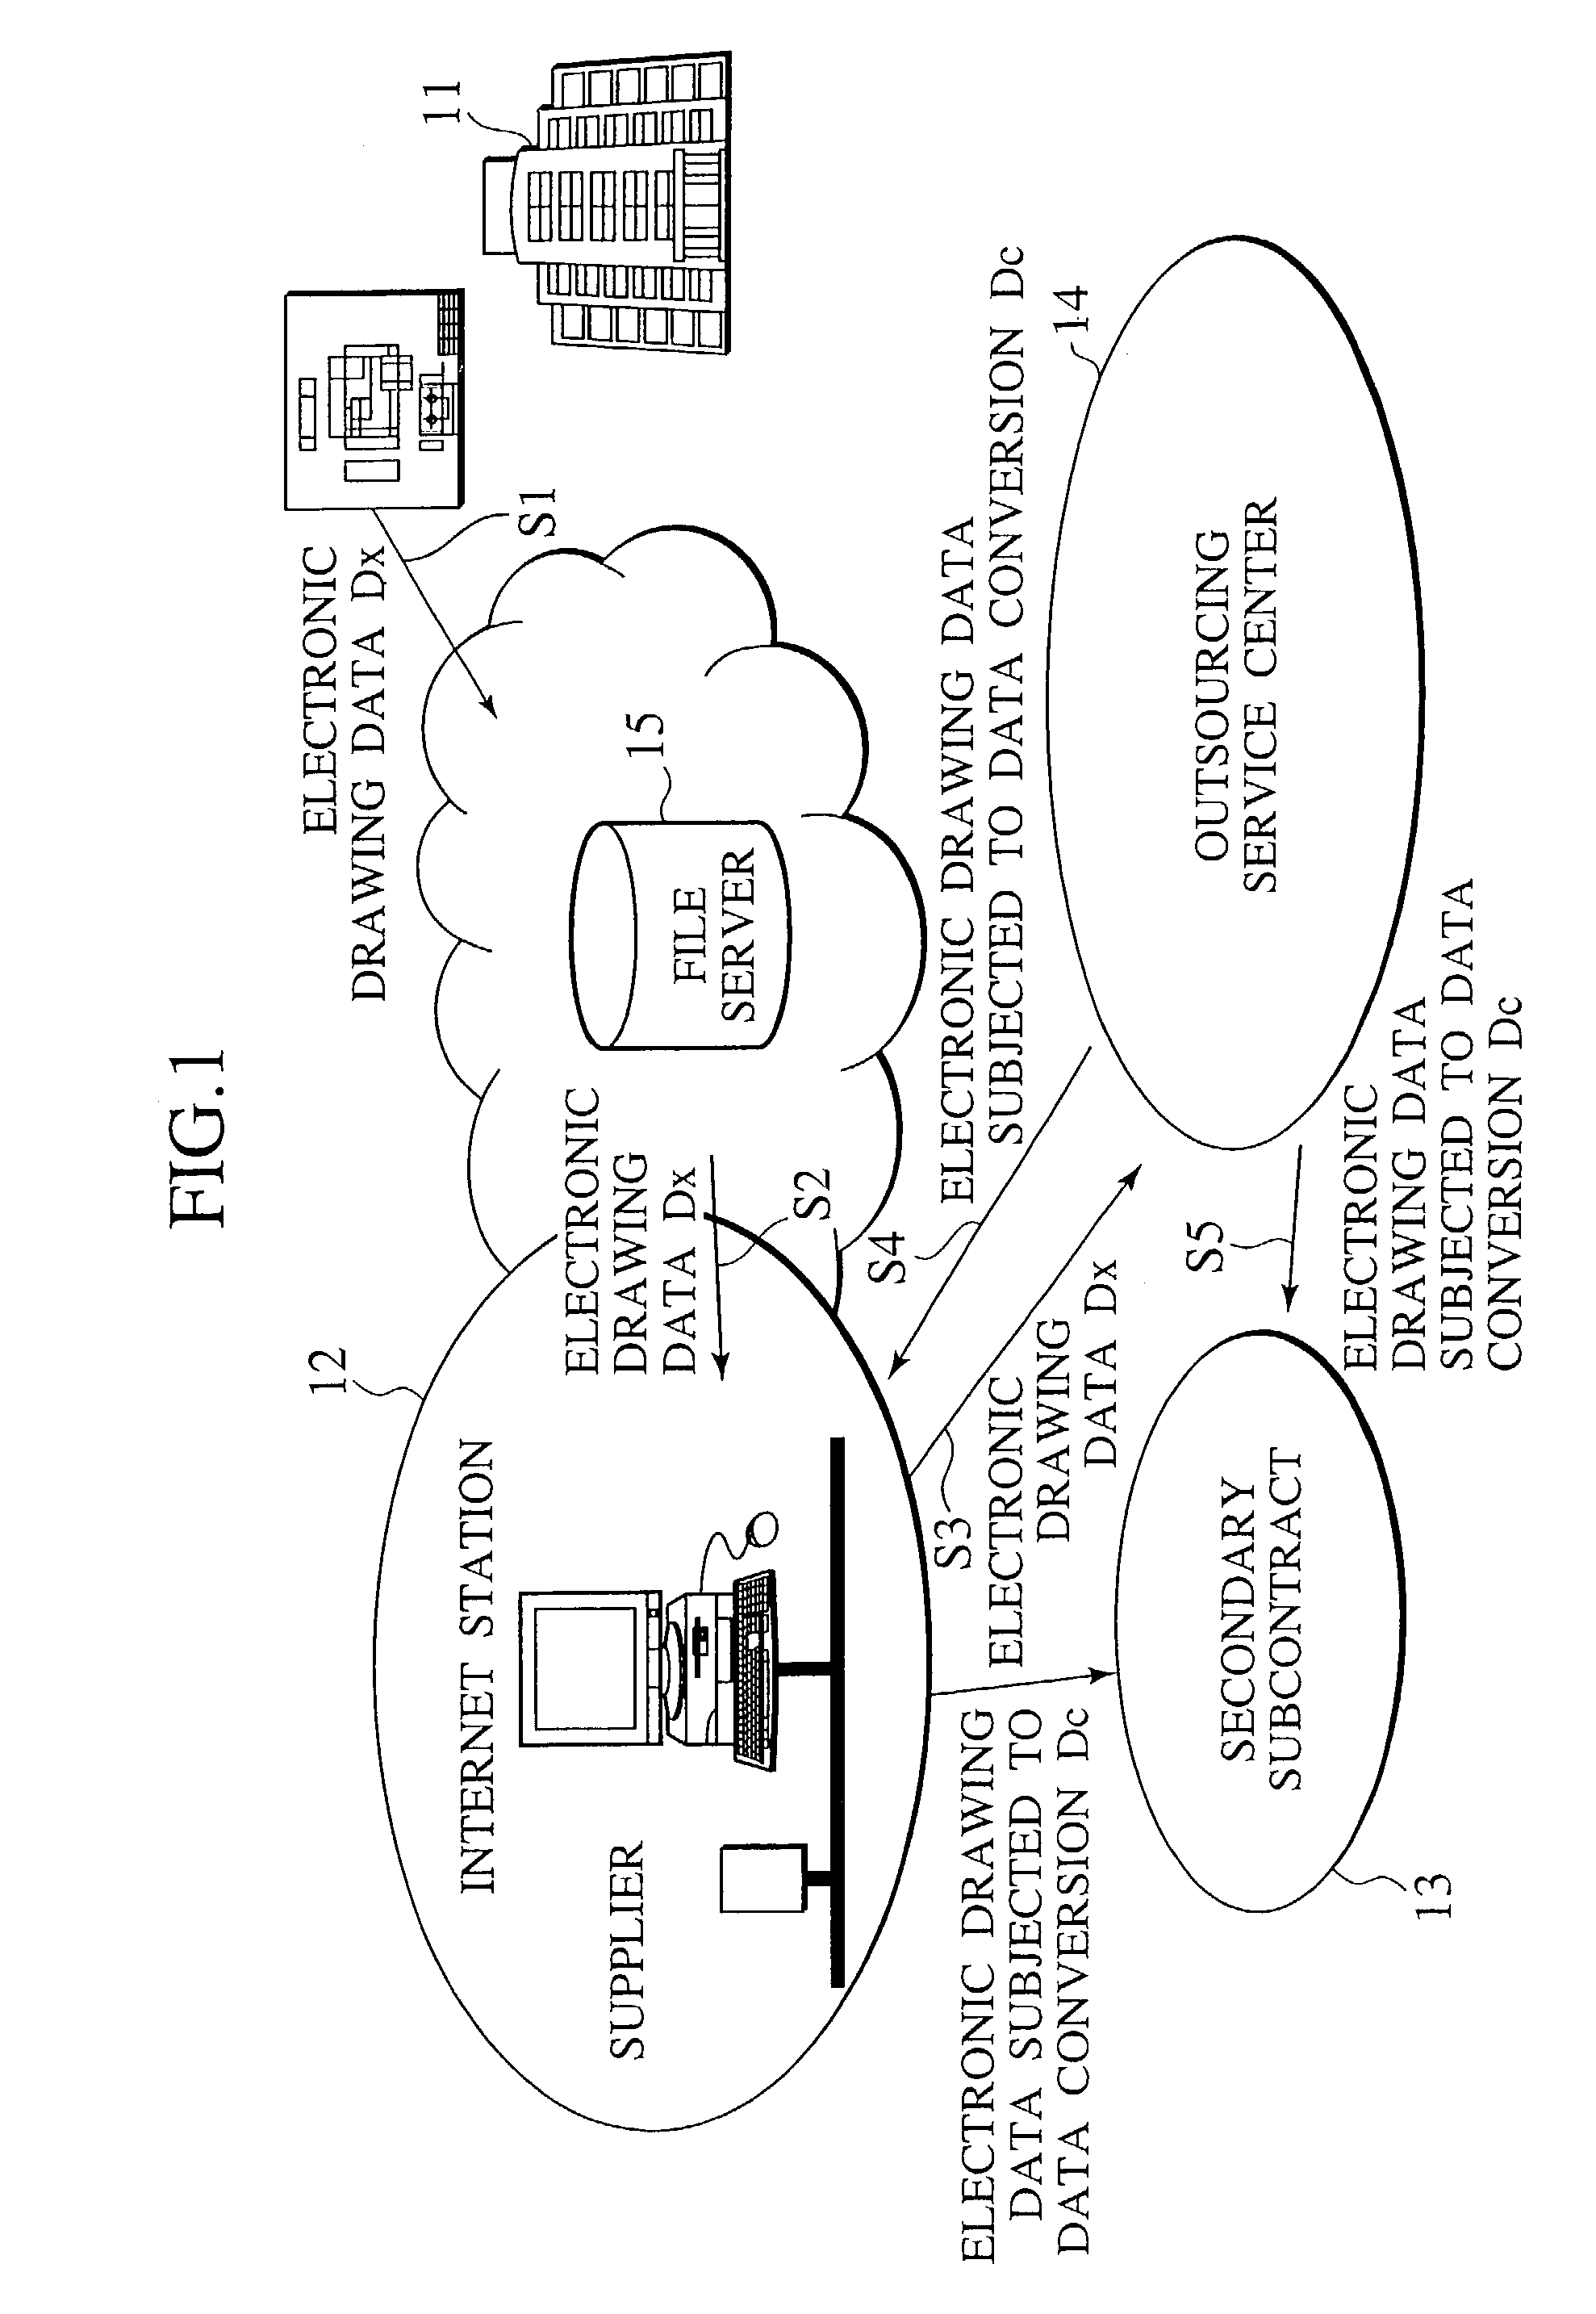 Apparatus for processing electronic drawing data